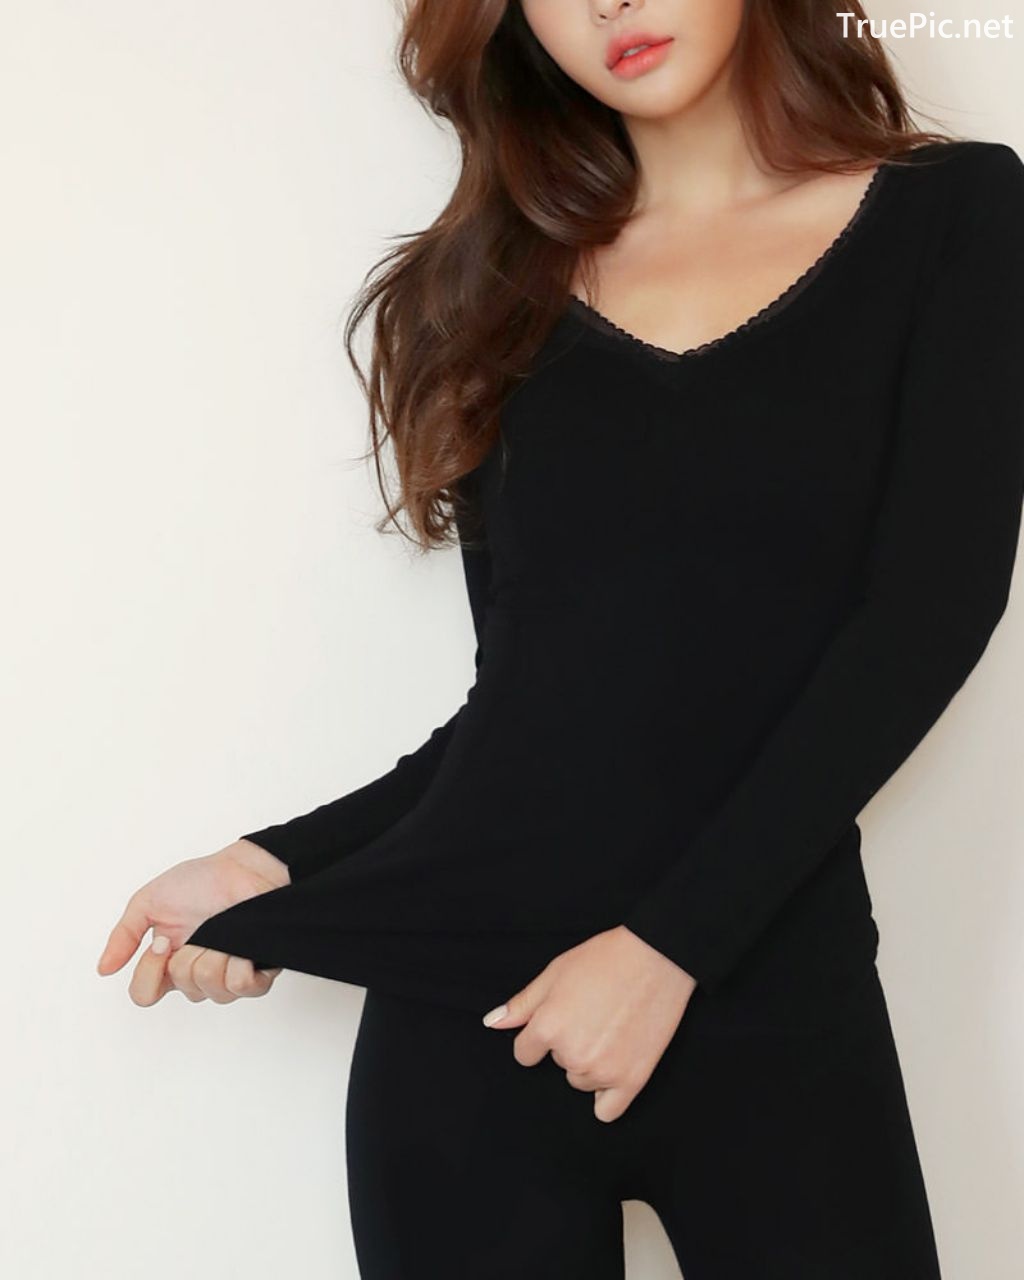 Image-Korean-Fashion-Model-Jin-Hee-Black-Tights-And-Winter-Sweater-Dress-TruePic.net- Picture-21